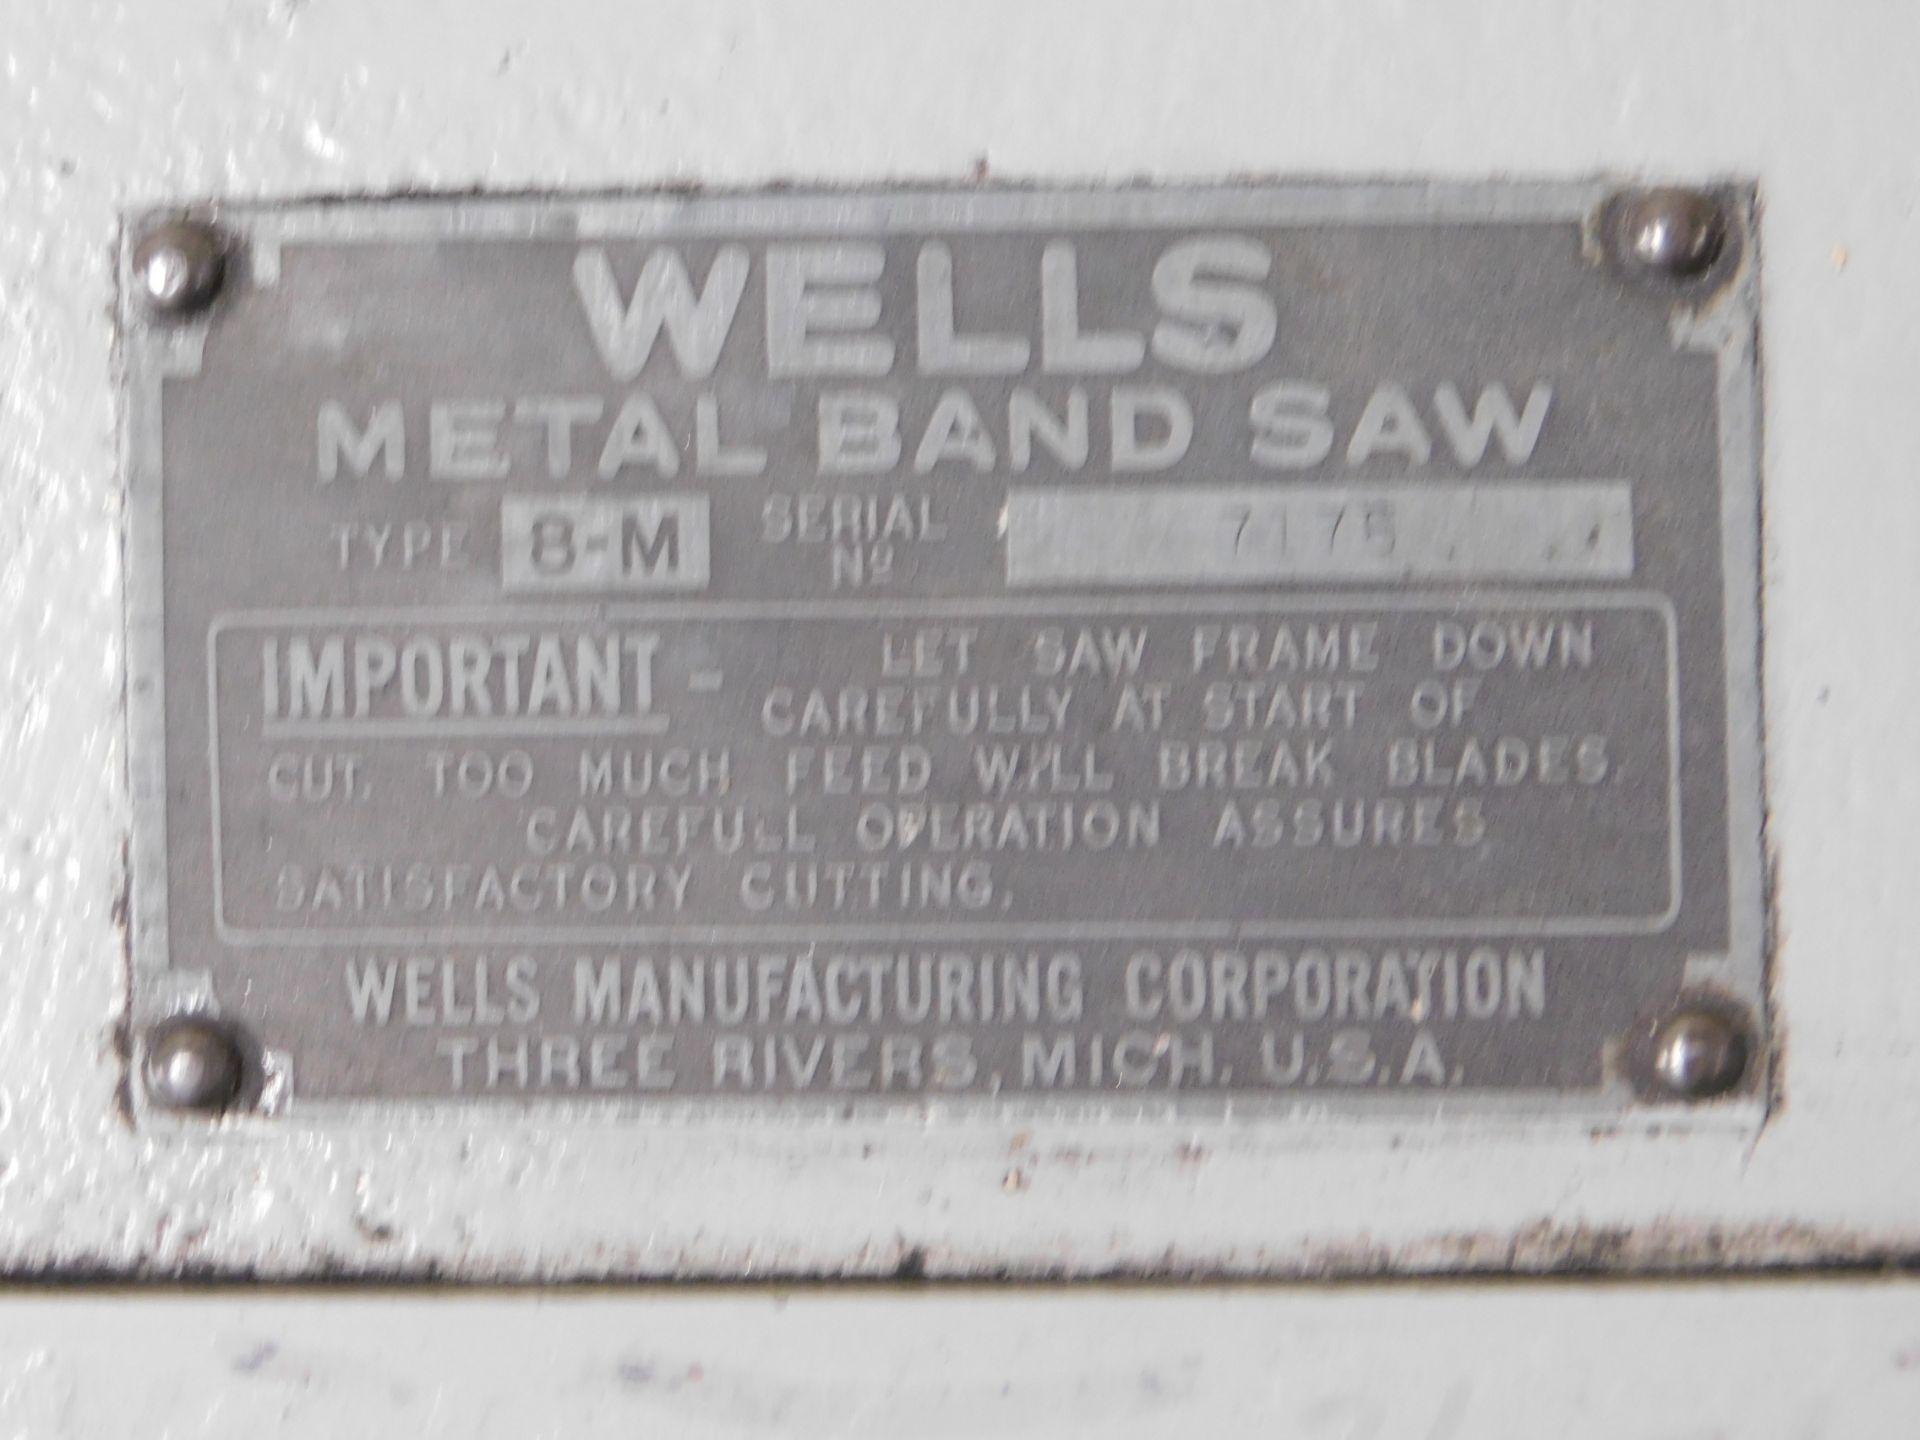 Wells Model 8-M Horizontal Band Saw SN 7175, 9 In. x 16 In. Capacity, 3/4 In. Blade, 3-phs - Image 8 of 8